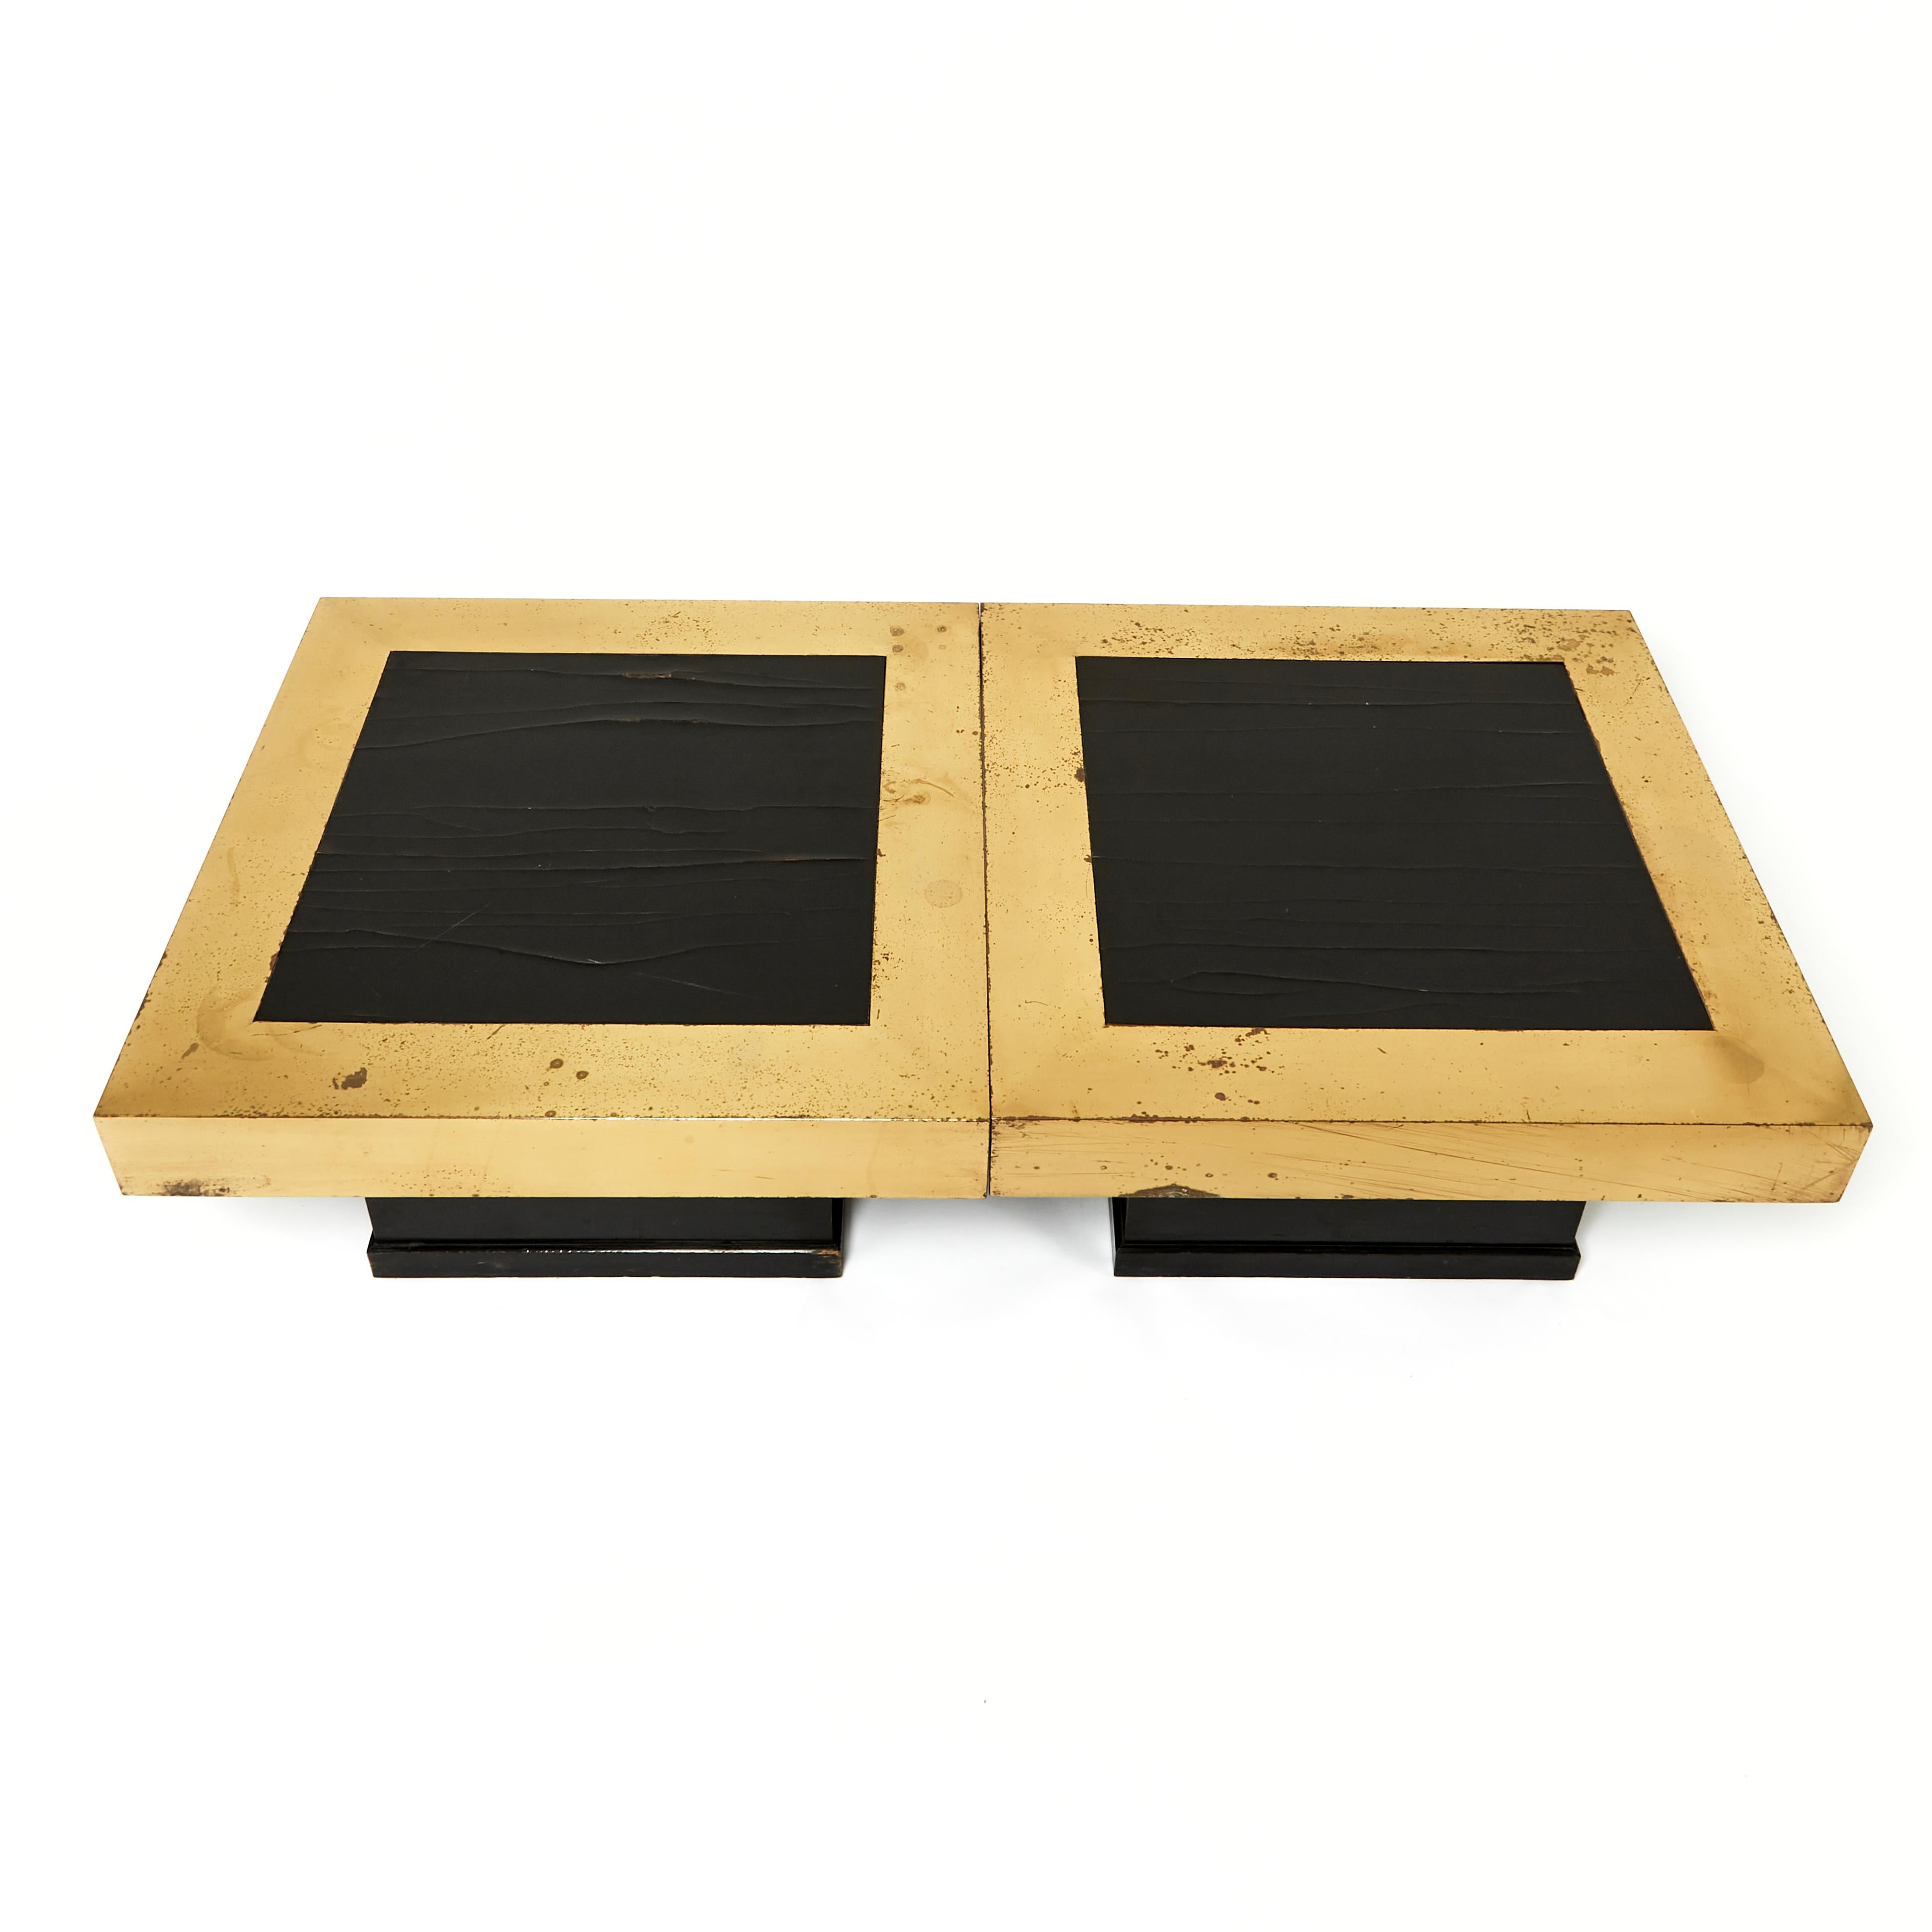 This pair of naturally aged black lacquer coffee tables have wide brass borders and are square in shape. The brass and tops do display some wear, and are shown in the images but the tables are structurally sound. Each one measures: 25 ¾ in, 65.4 cm